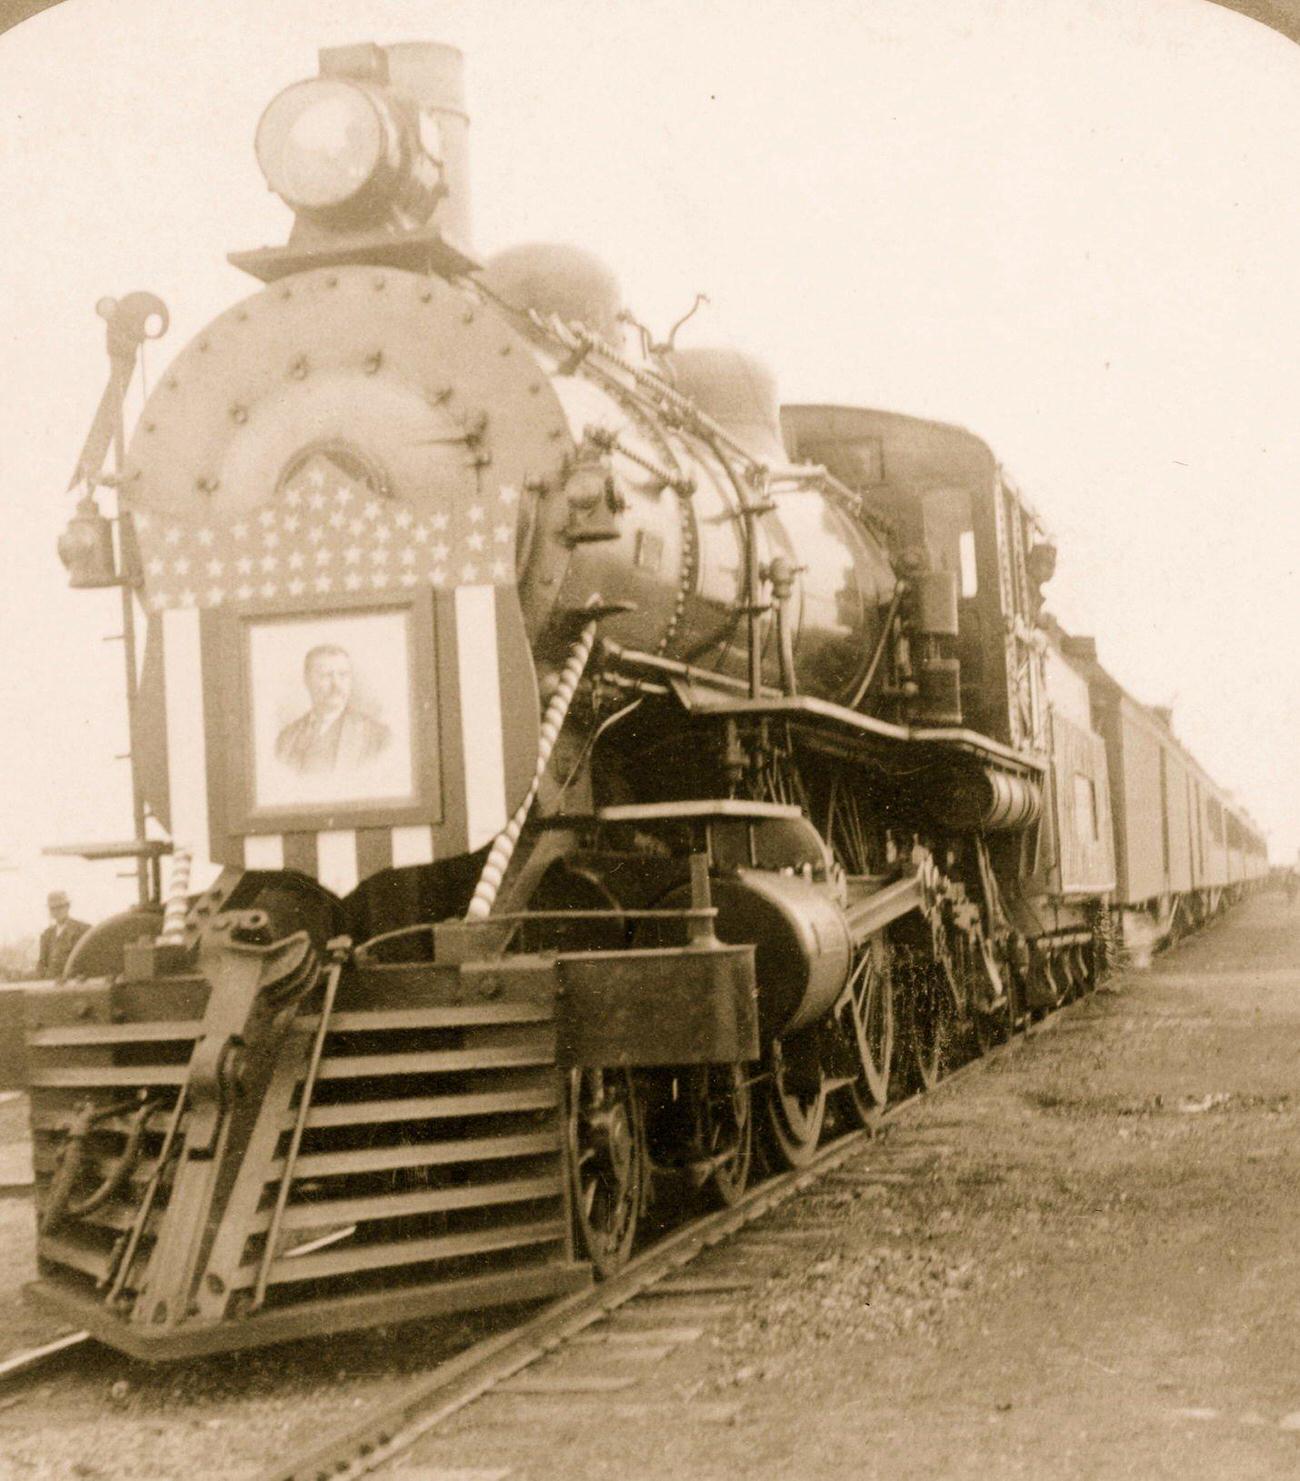 Teddy Roosevelt Campaign Train Locomotive with his Image as an escutcheon on face of the Engine